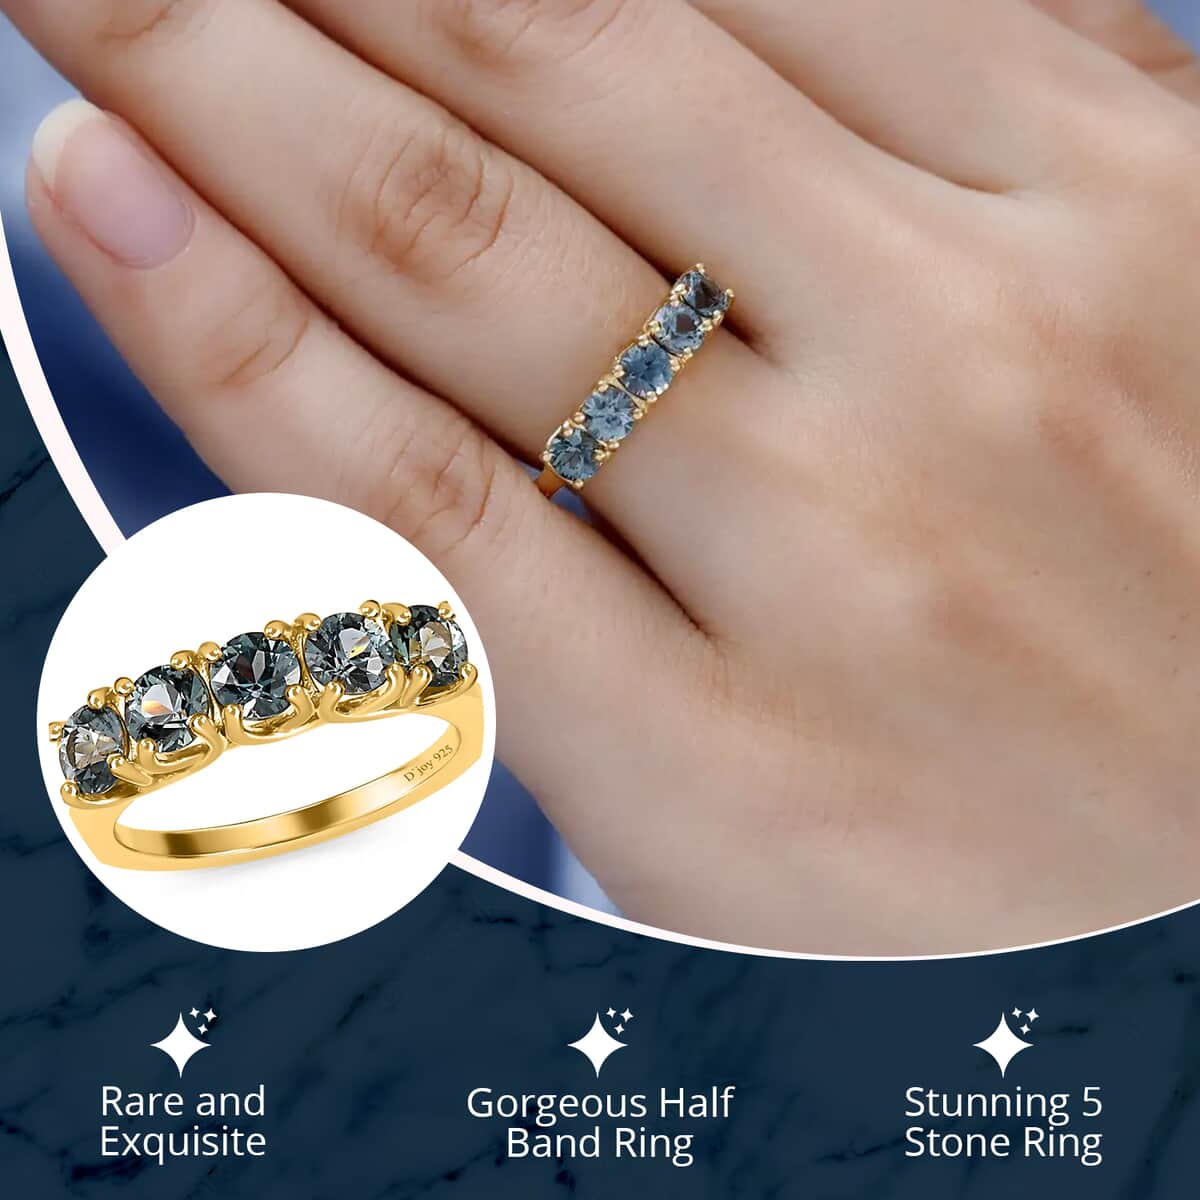 Parti Sapphire Ring, Sapphire 5 Stone Ring, Half Eternity Band Ring, Vermeil YG Over Sterling Silver Ring, Wedding Band For Women 1.75 ctw (Size 5.0) image number 2